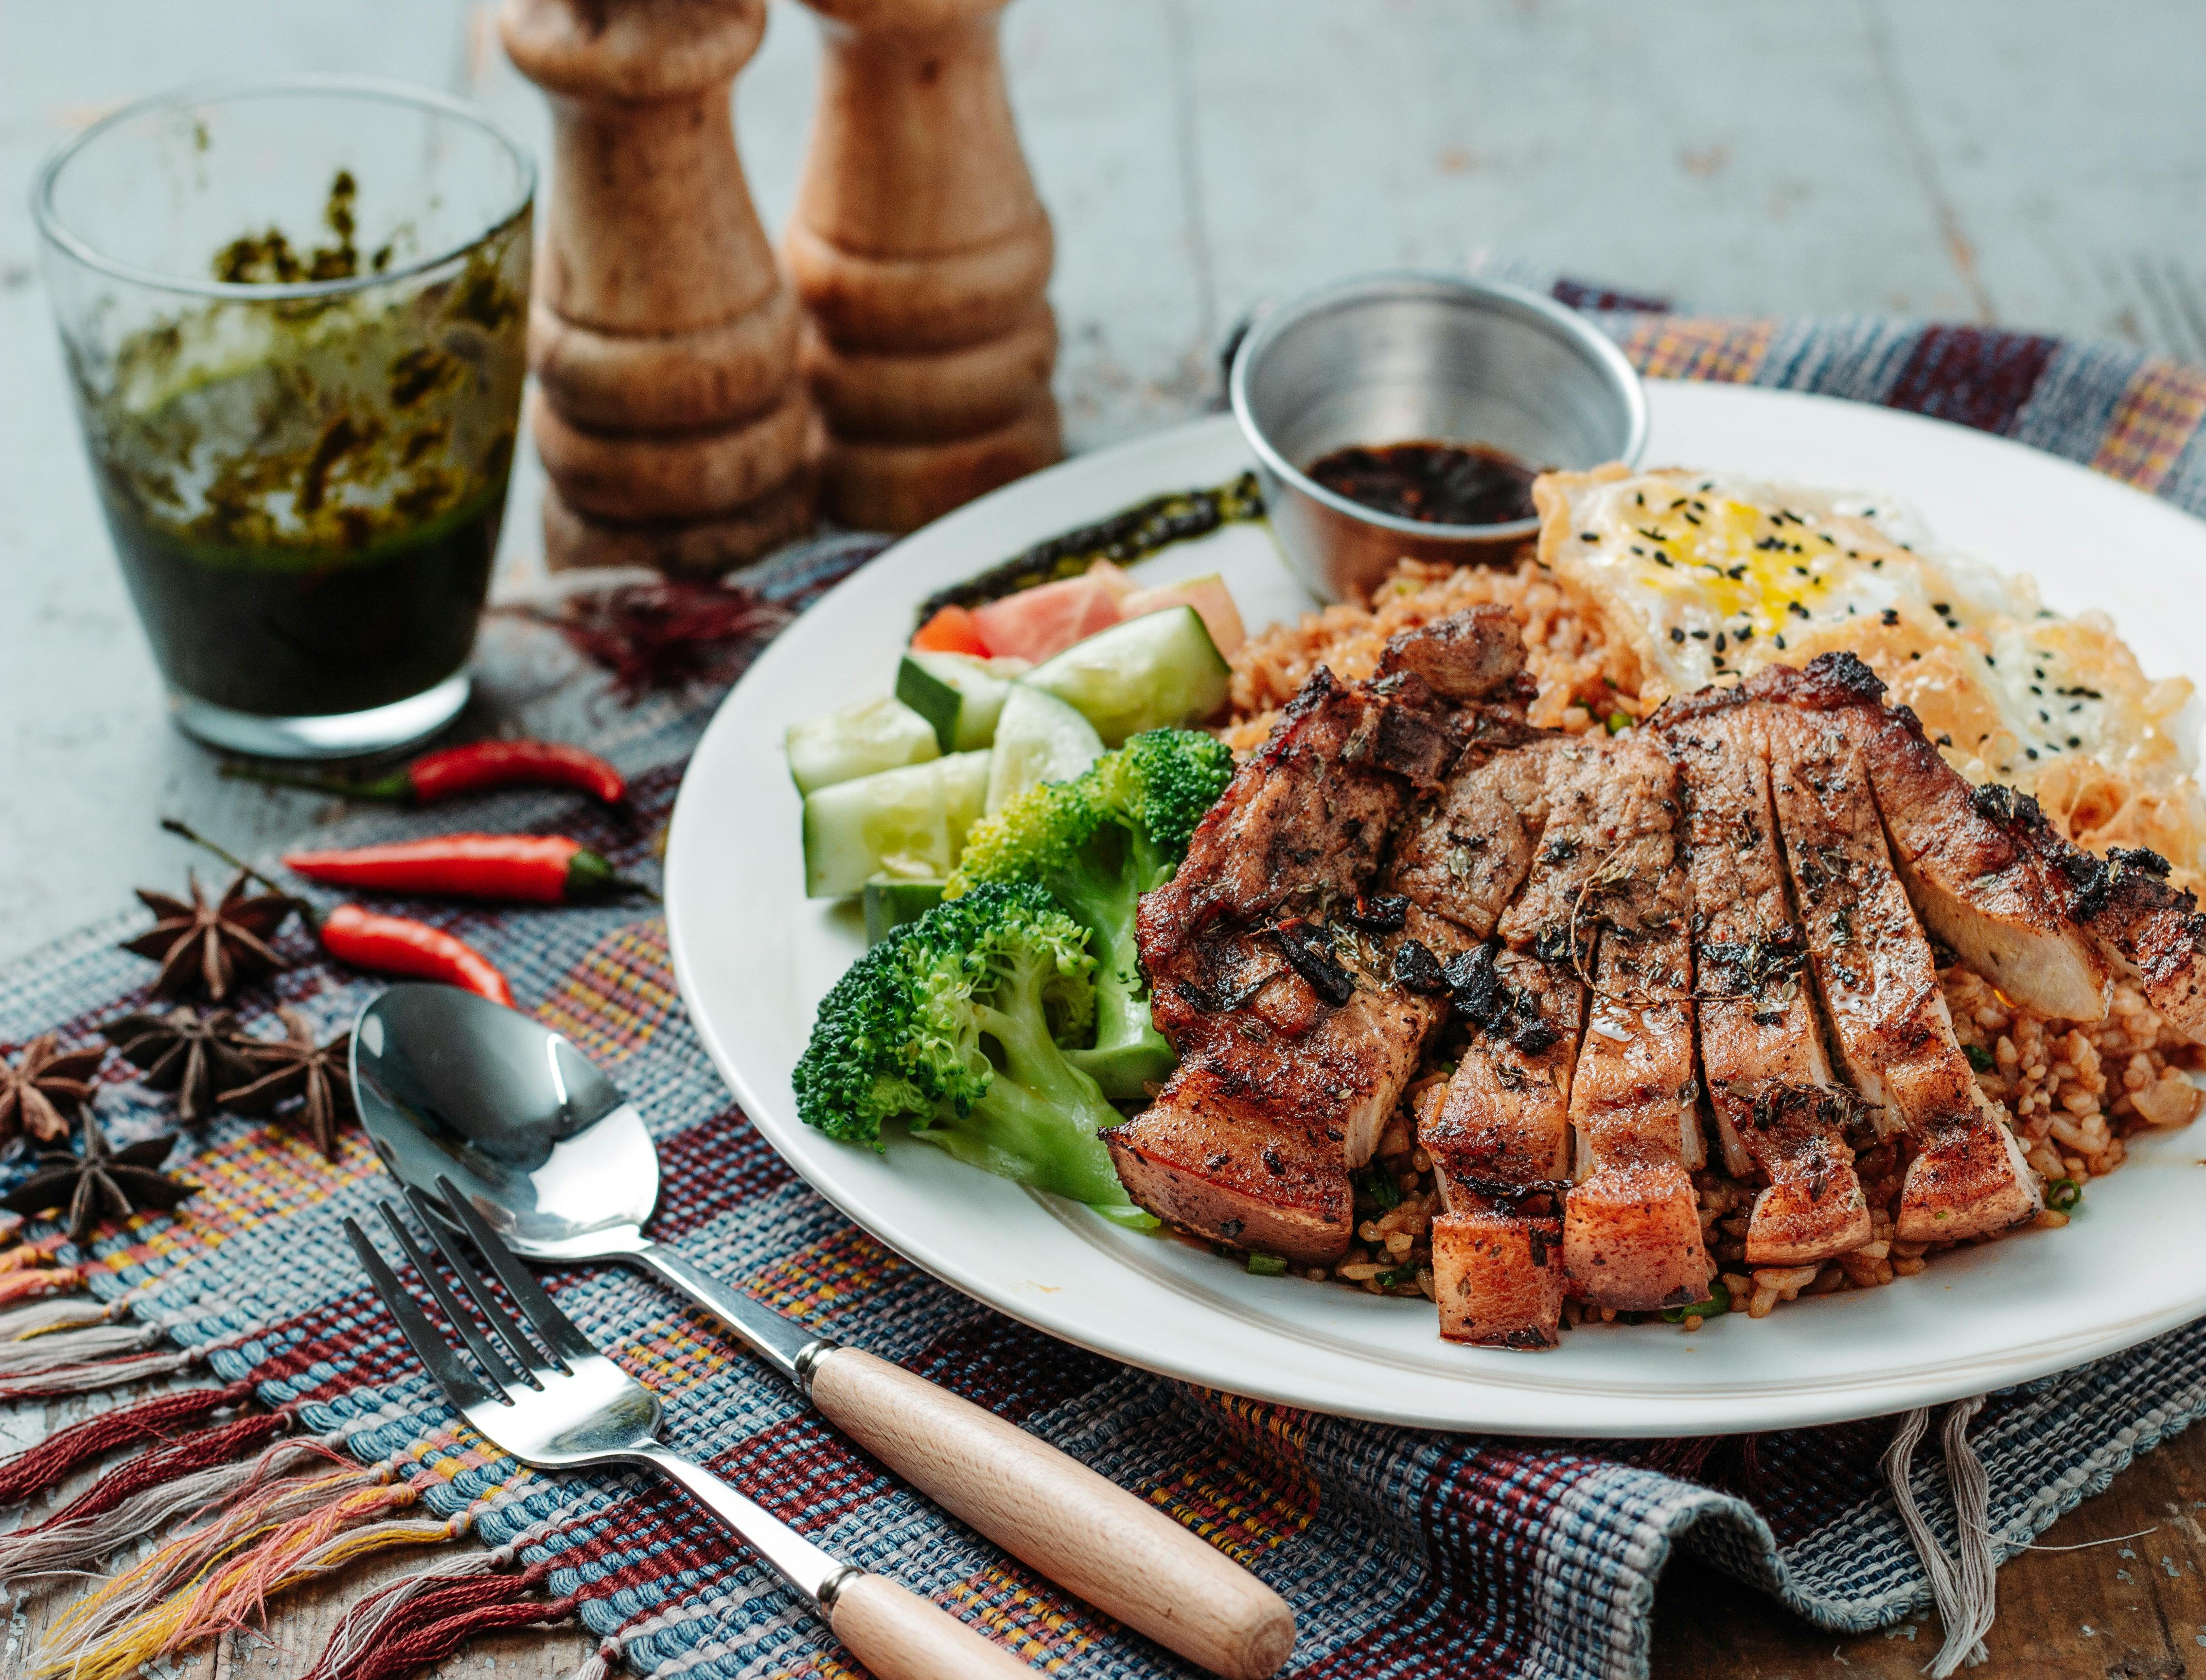 Grilled barbecue on the table. | Photo: Pexels